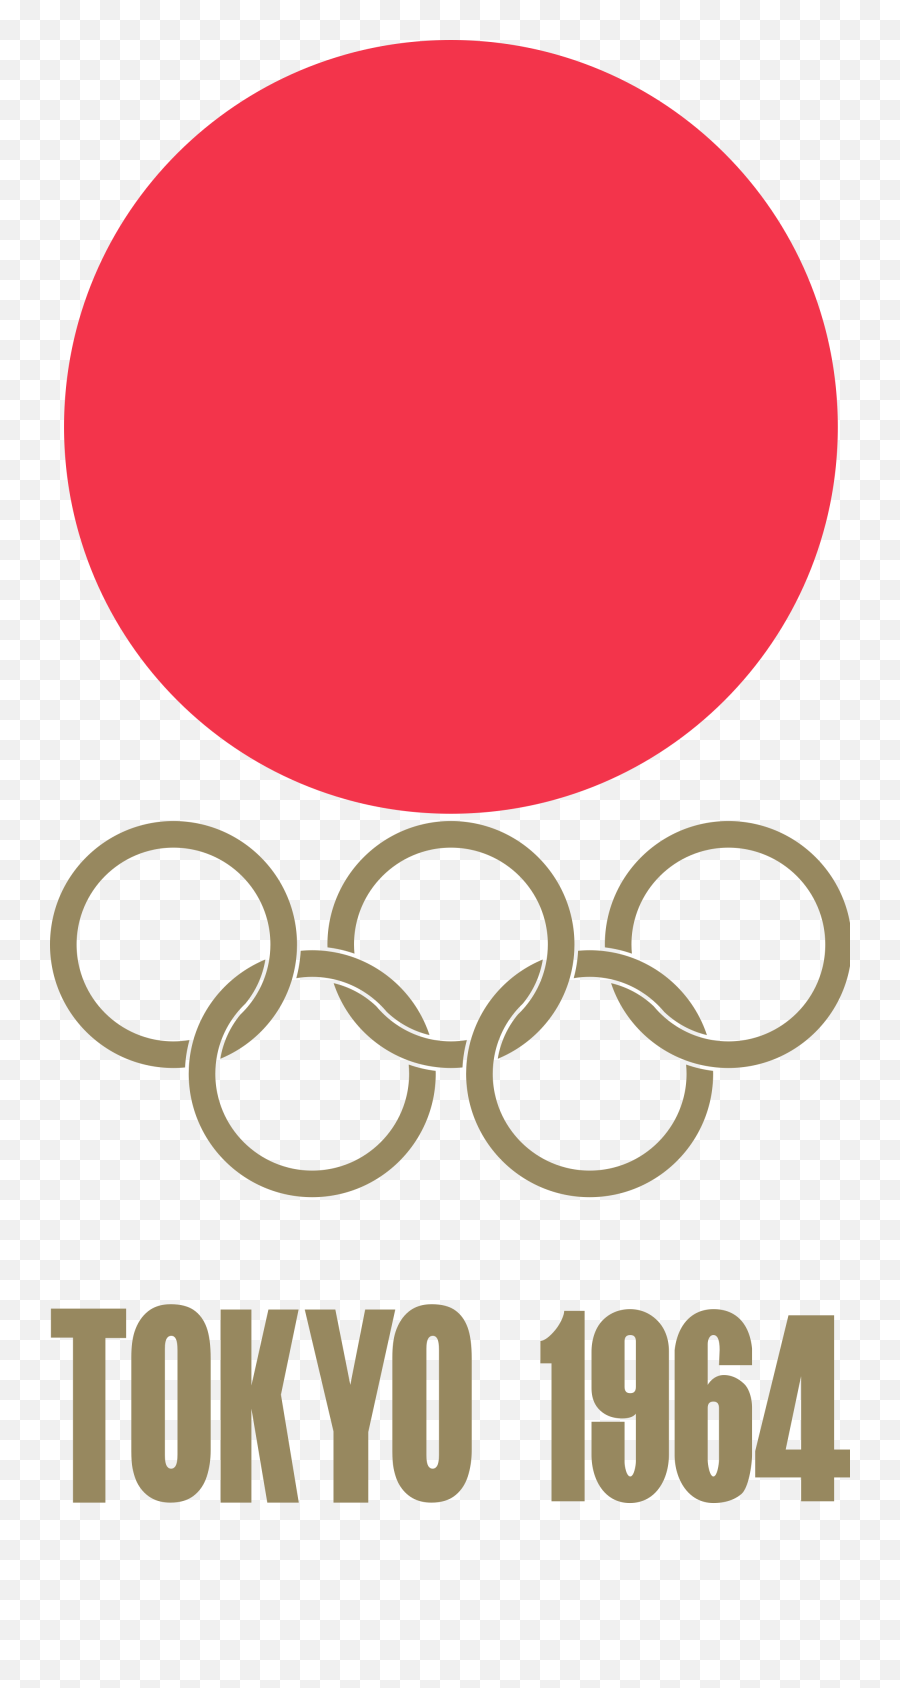 1964 Summer Olympics - Tokyo 1964 Olympics Logo Png,Olympic Rings Png